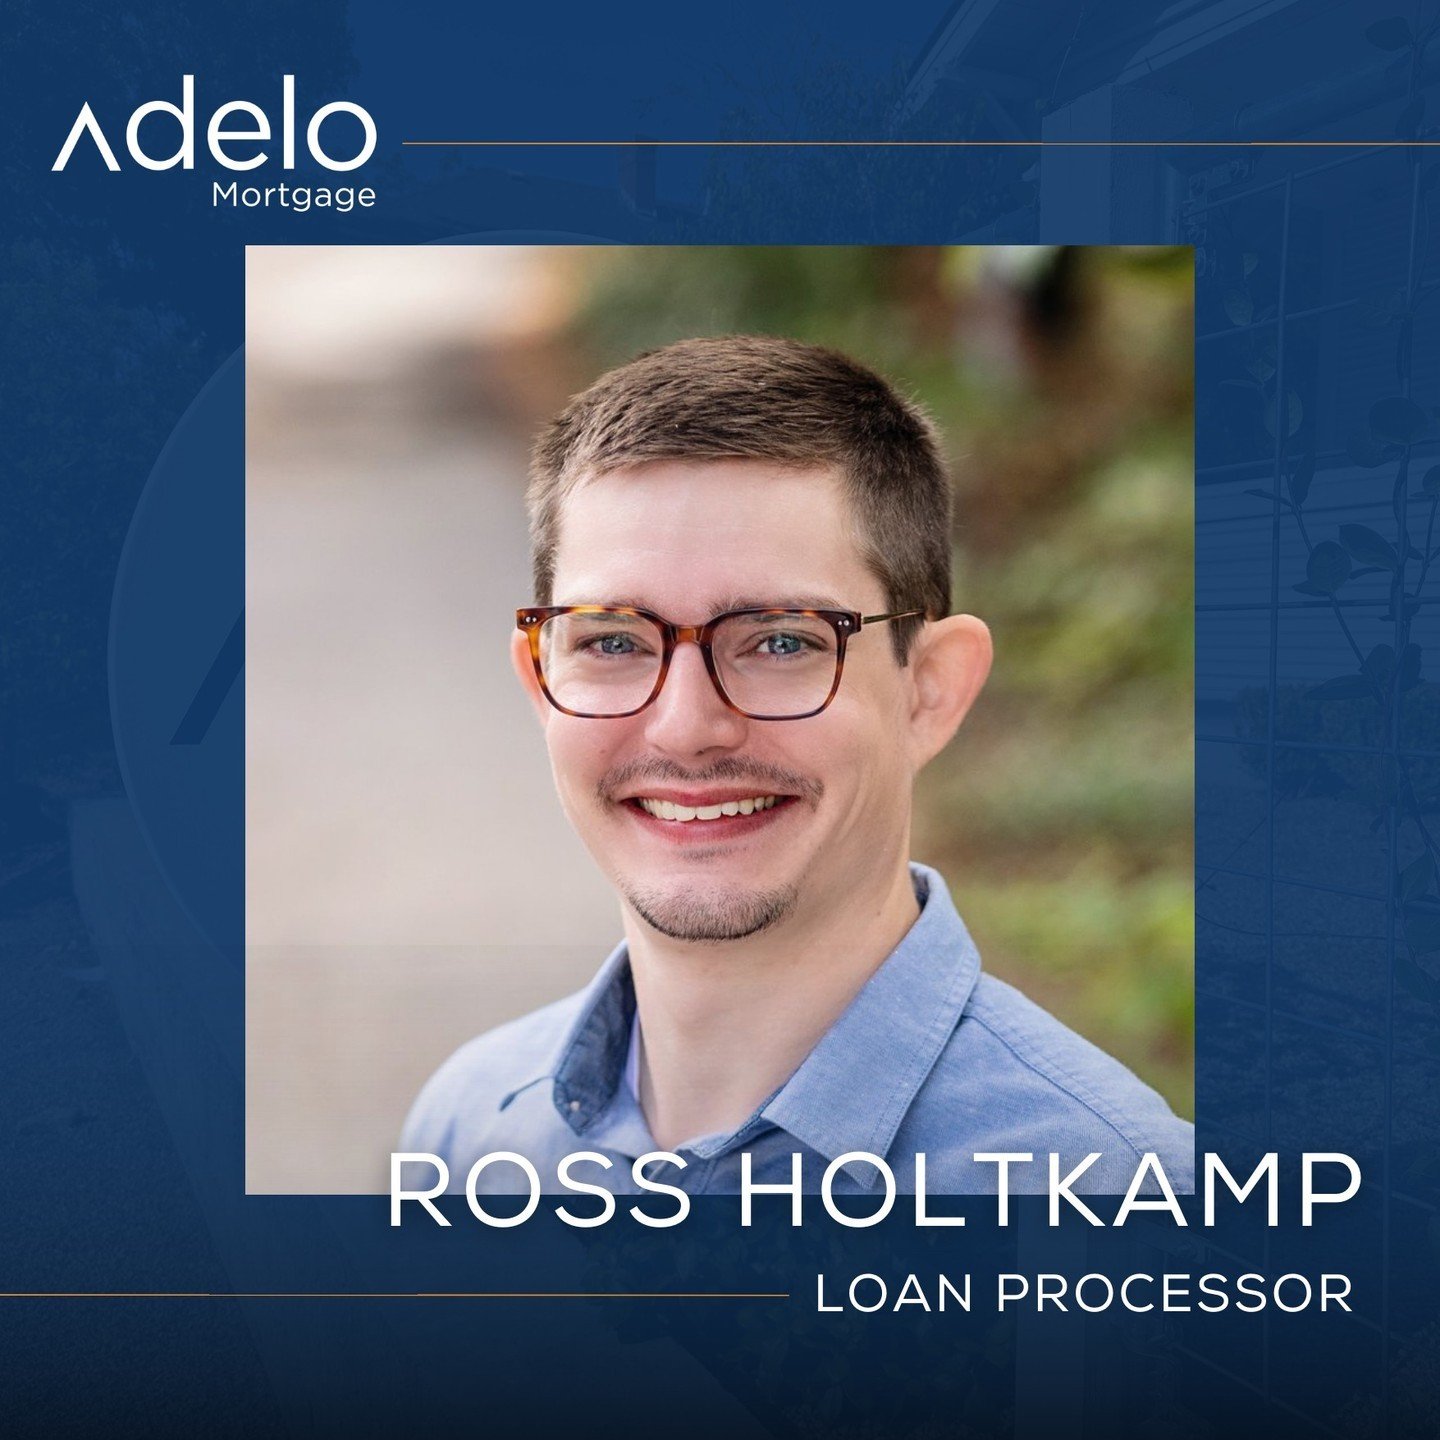 Meet the Adelo Team 🔸🔷🔸 Ross Holtkamp is one of our loan processors here at Adelo Mortgage and has been working for us since 2020. He primarily handles all the 3rd party order outs in our office and manages our appraisal process, title work, insur